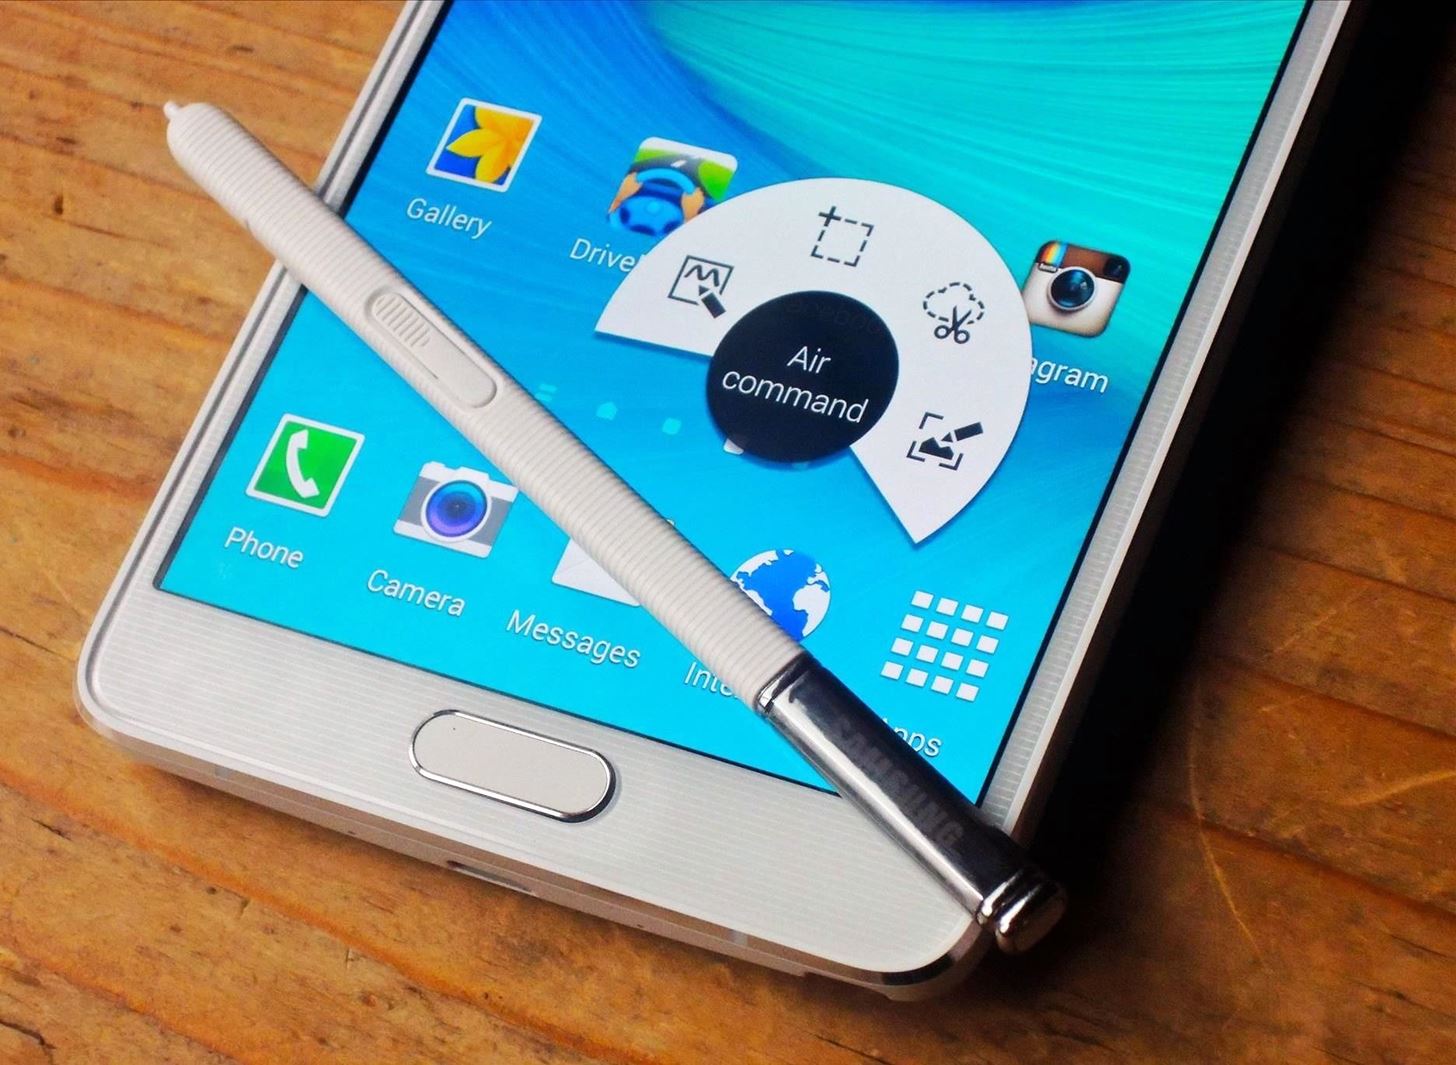 7 Features That Make the Samsung Galaxy Note 4 Great